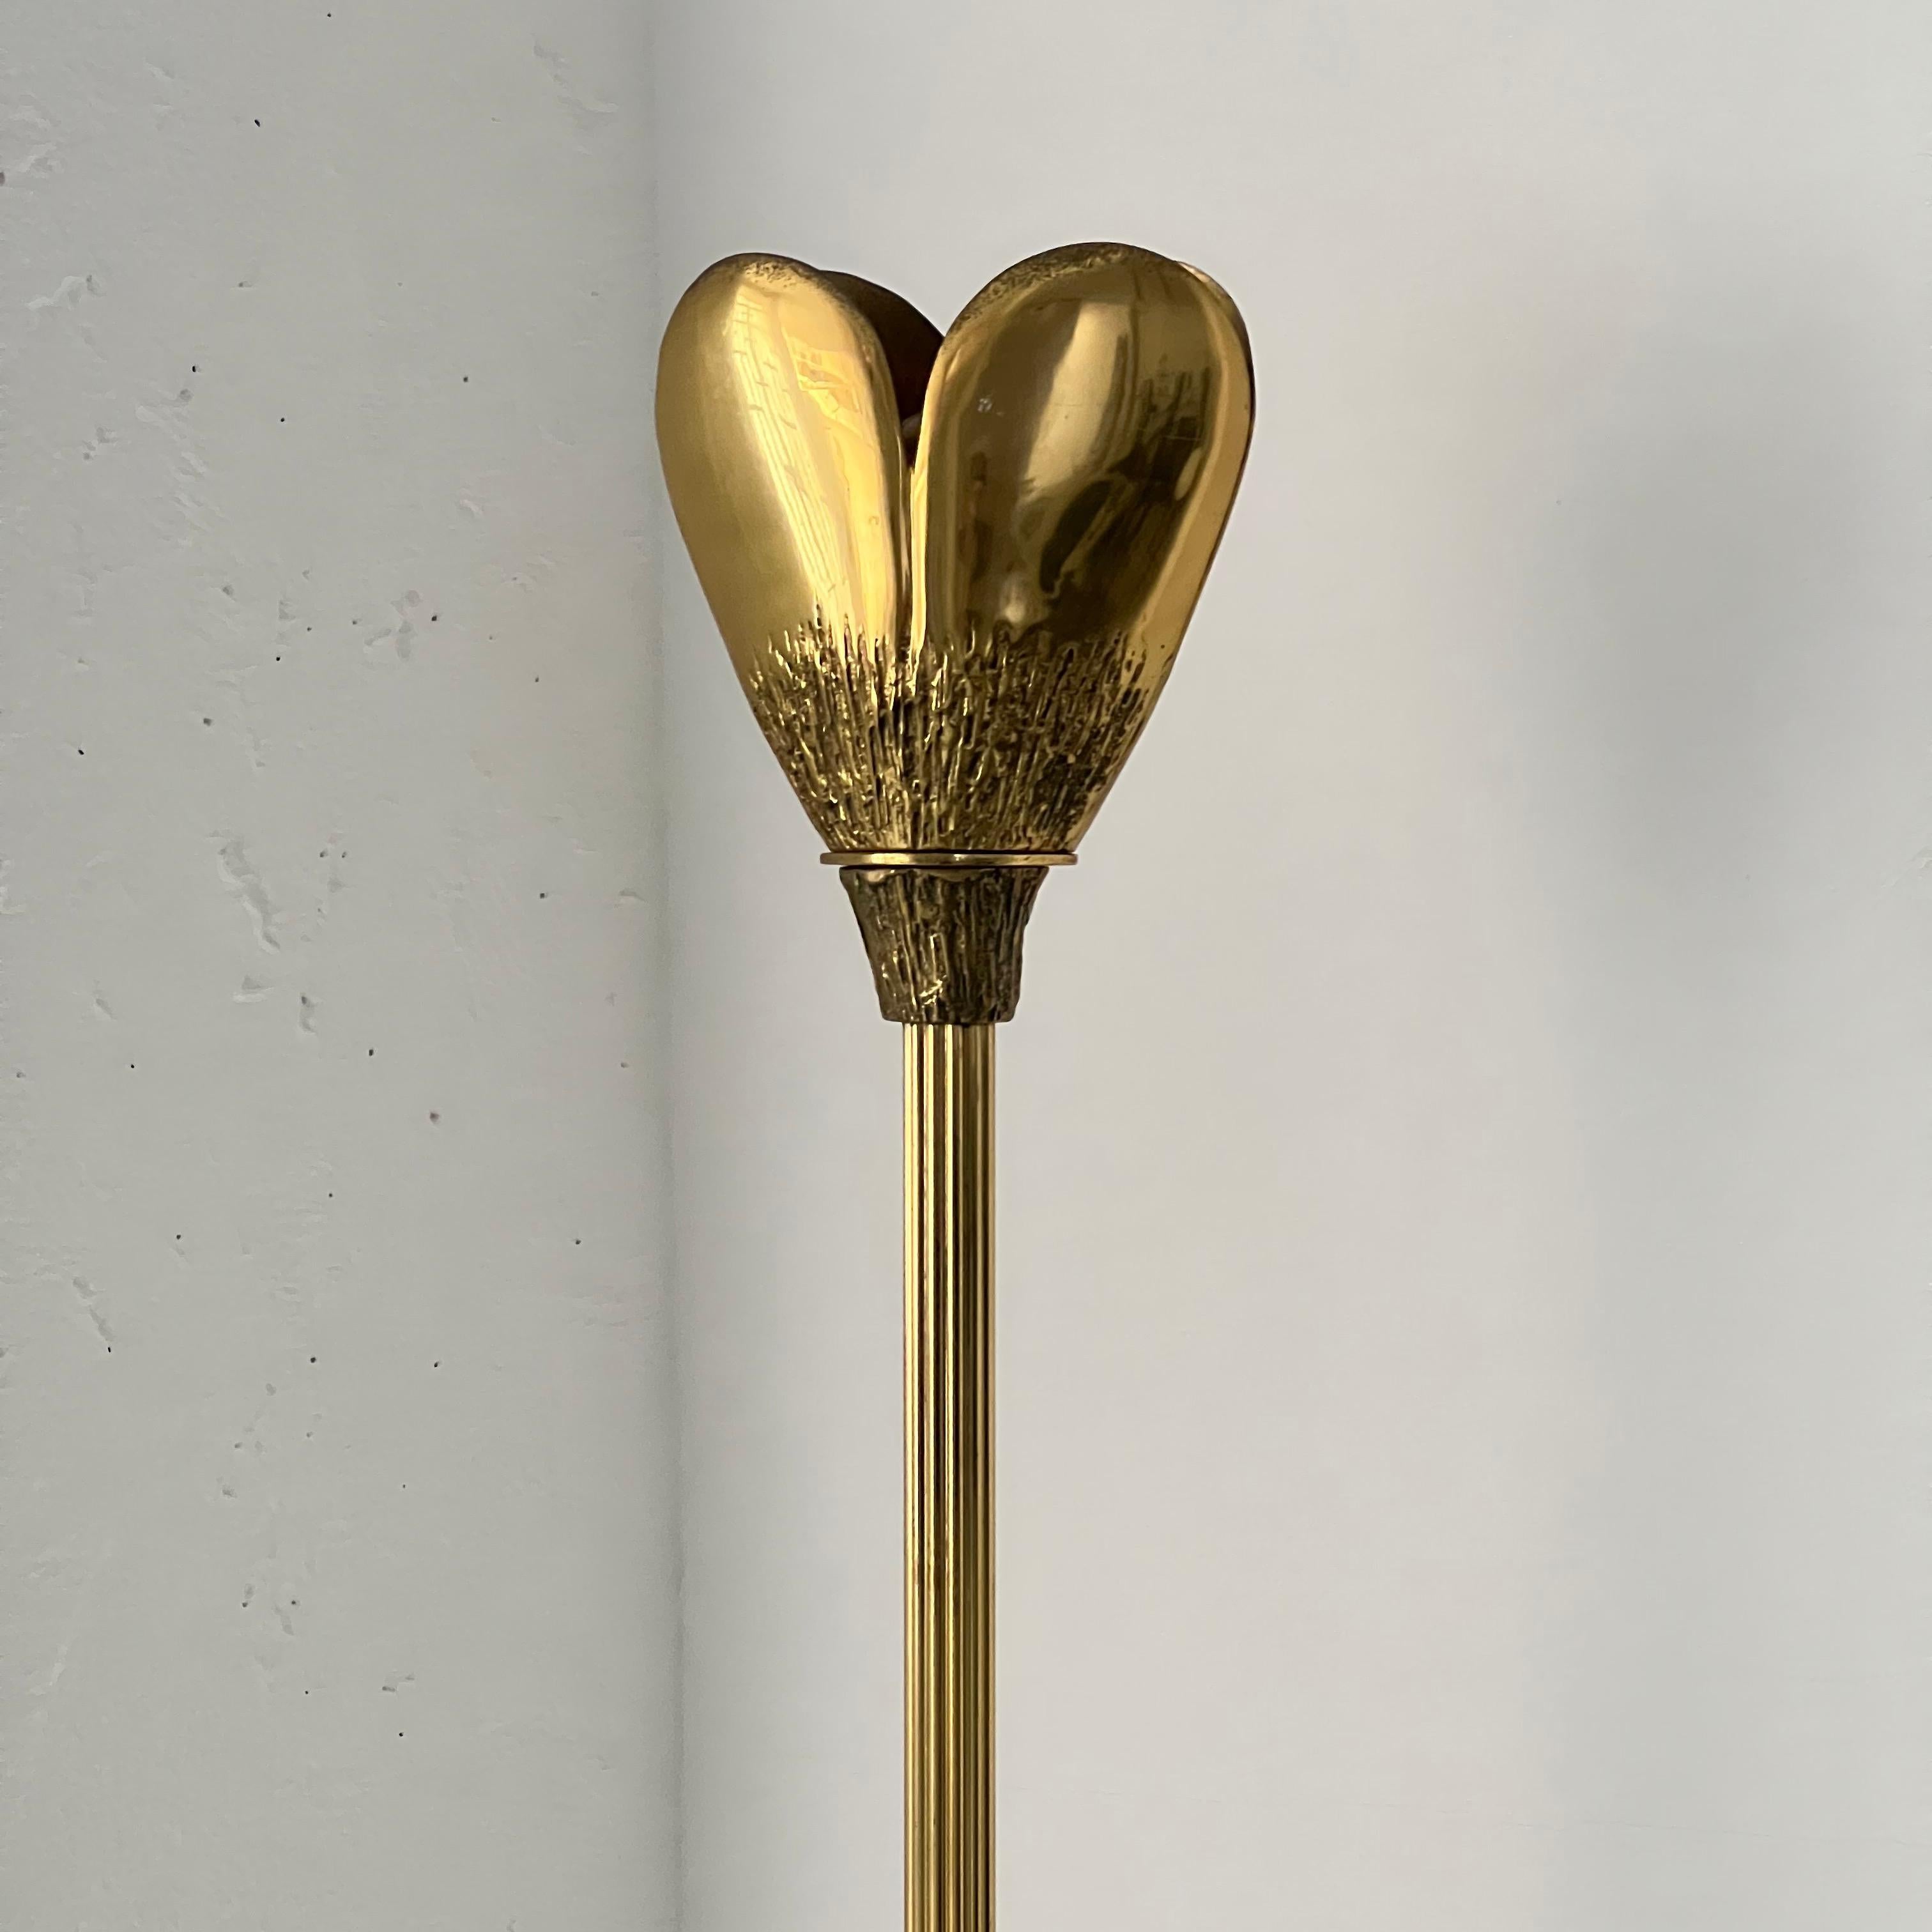 Offered for sale is a slender vintage floor lamp in solid brass, with finely hand-decorated base and lampshade and extruded body. The main body has a peculiar 